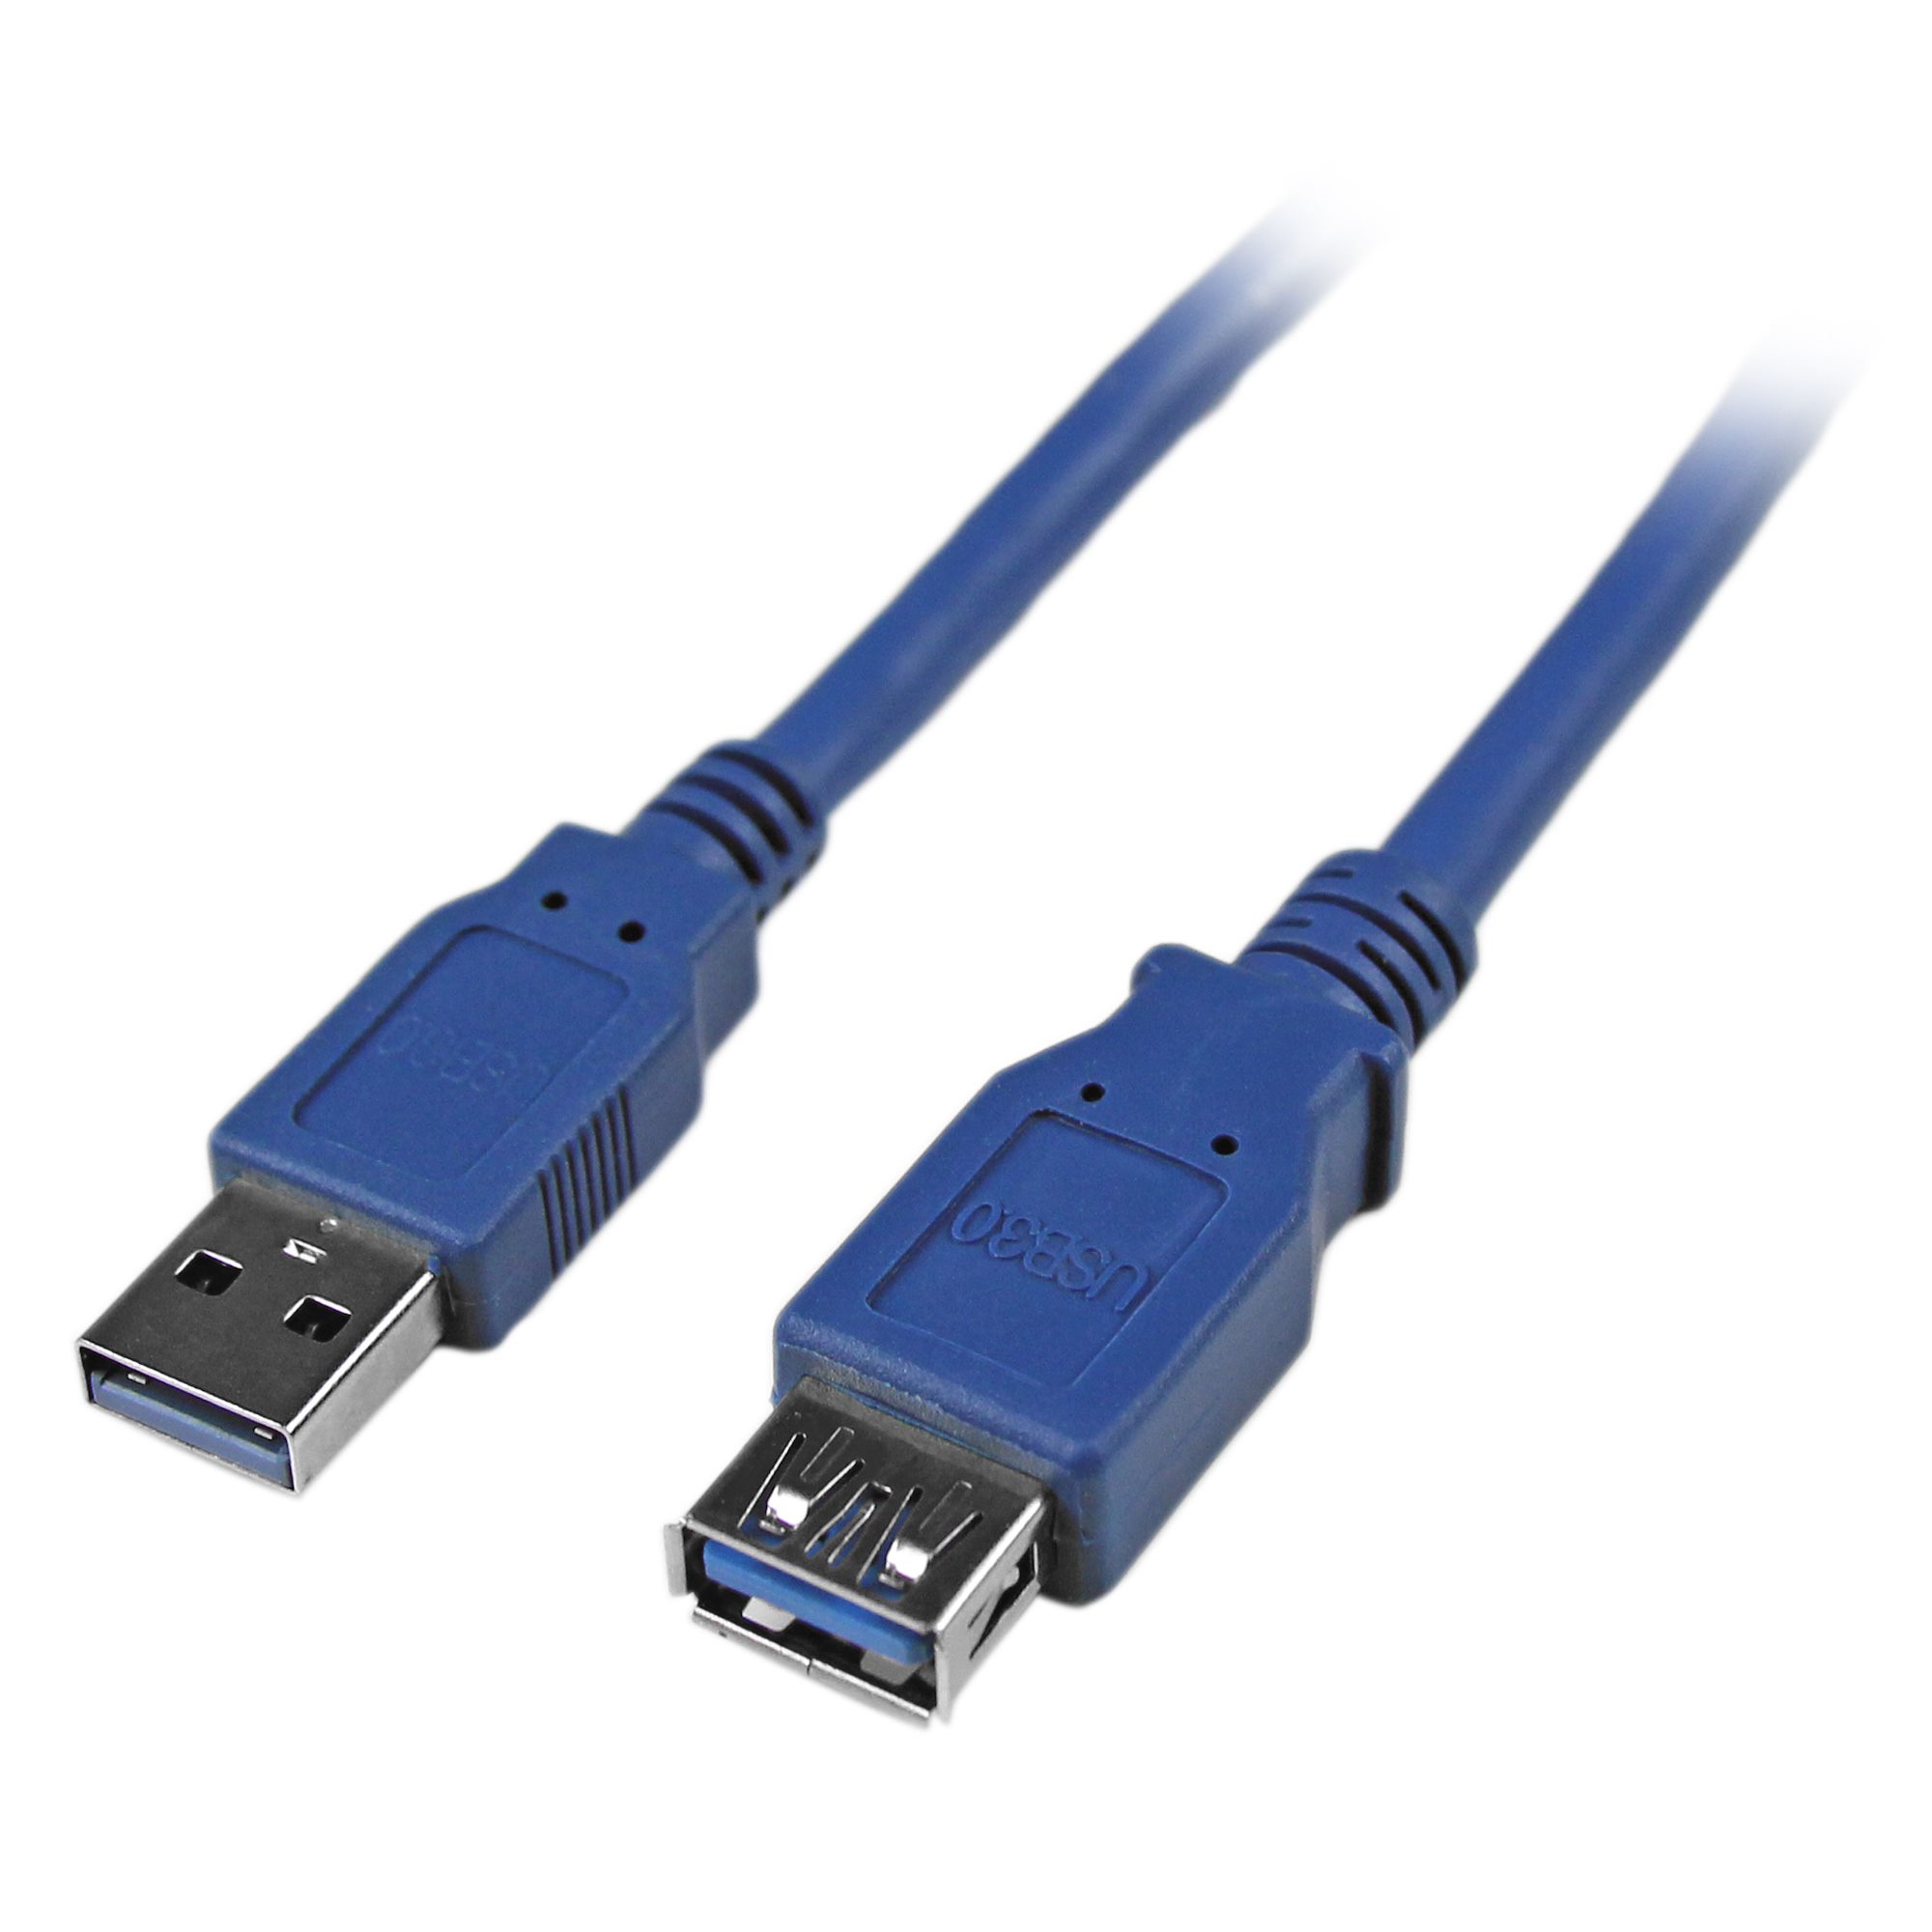 USB 3.0 A Male to A Male USB to USB Cable Cord 2 Feet Data Transfer Blue 